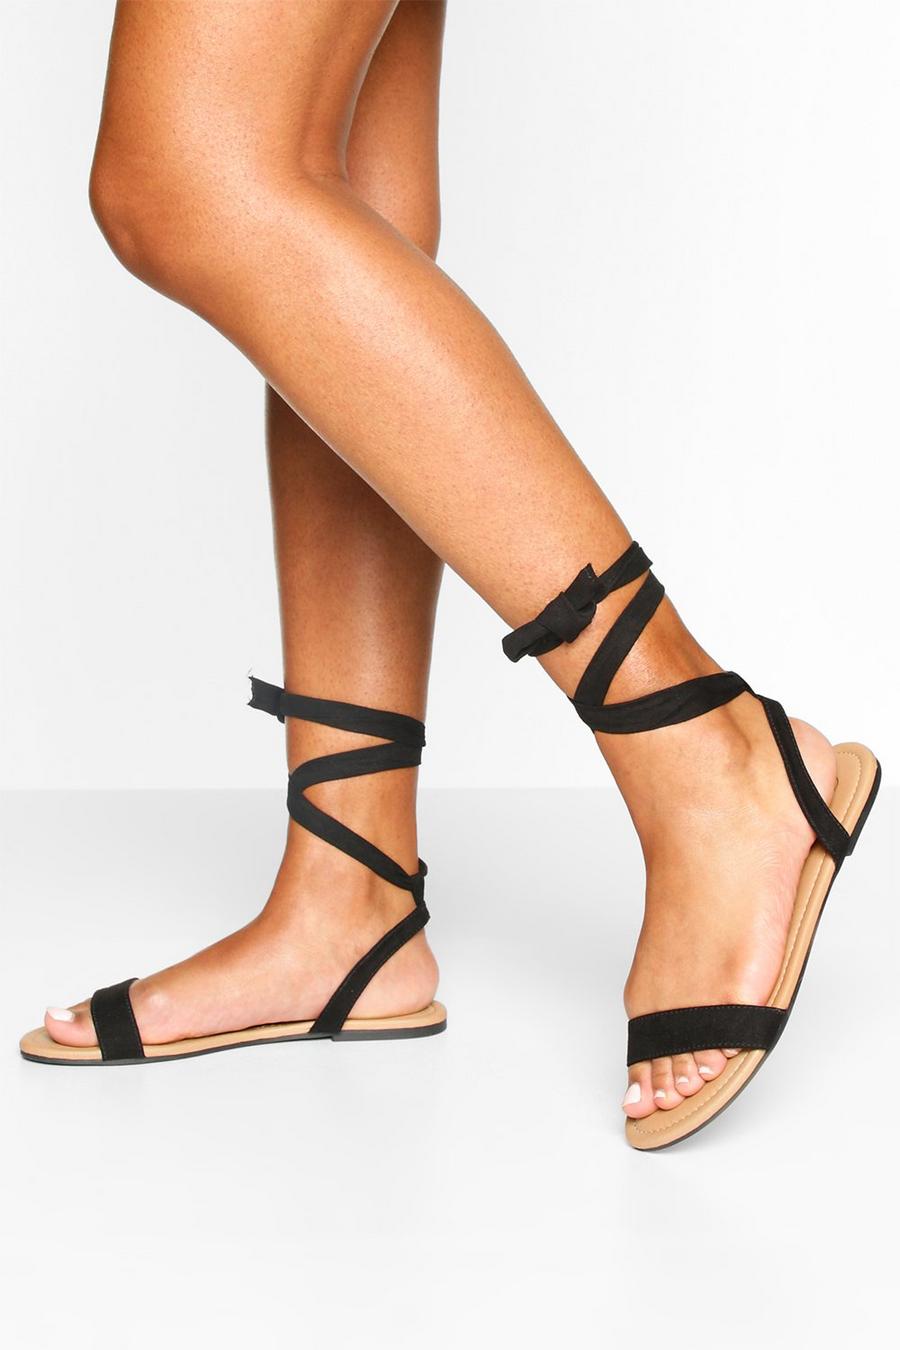 Black New Look wide fit leather strap sandals in rose gold